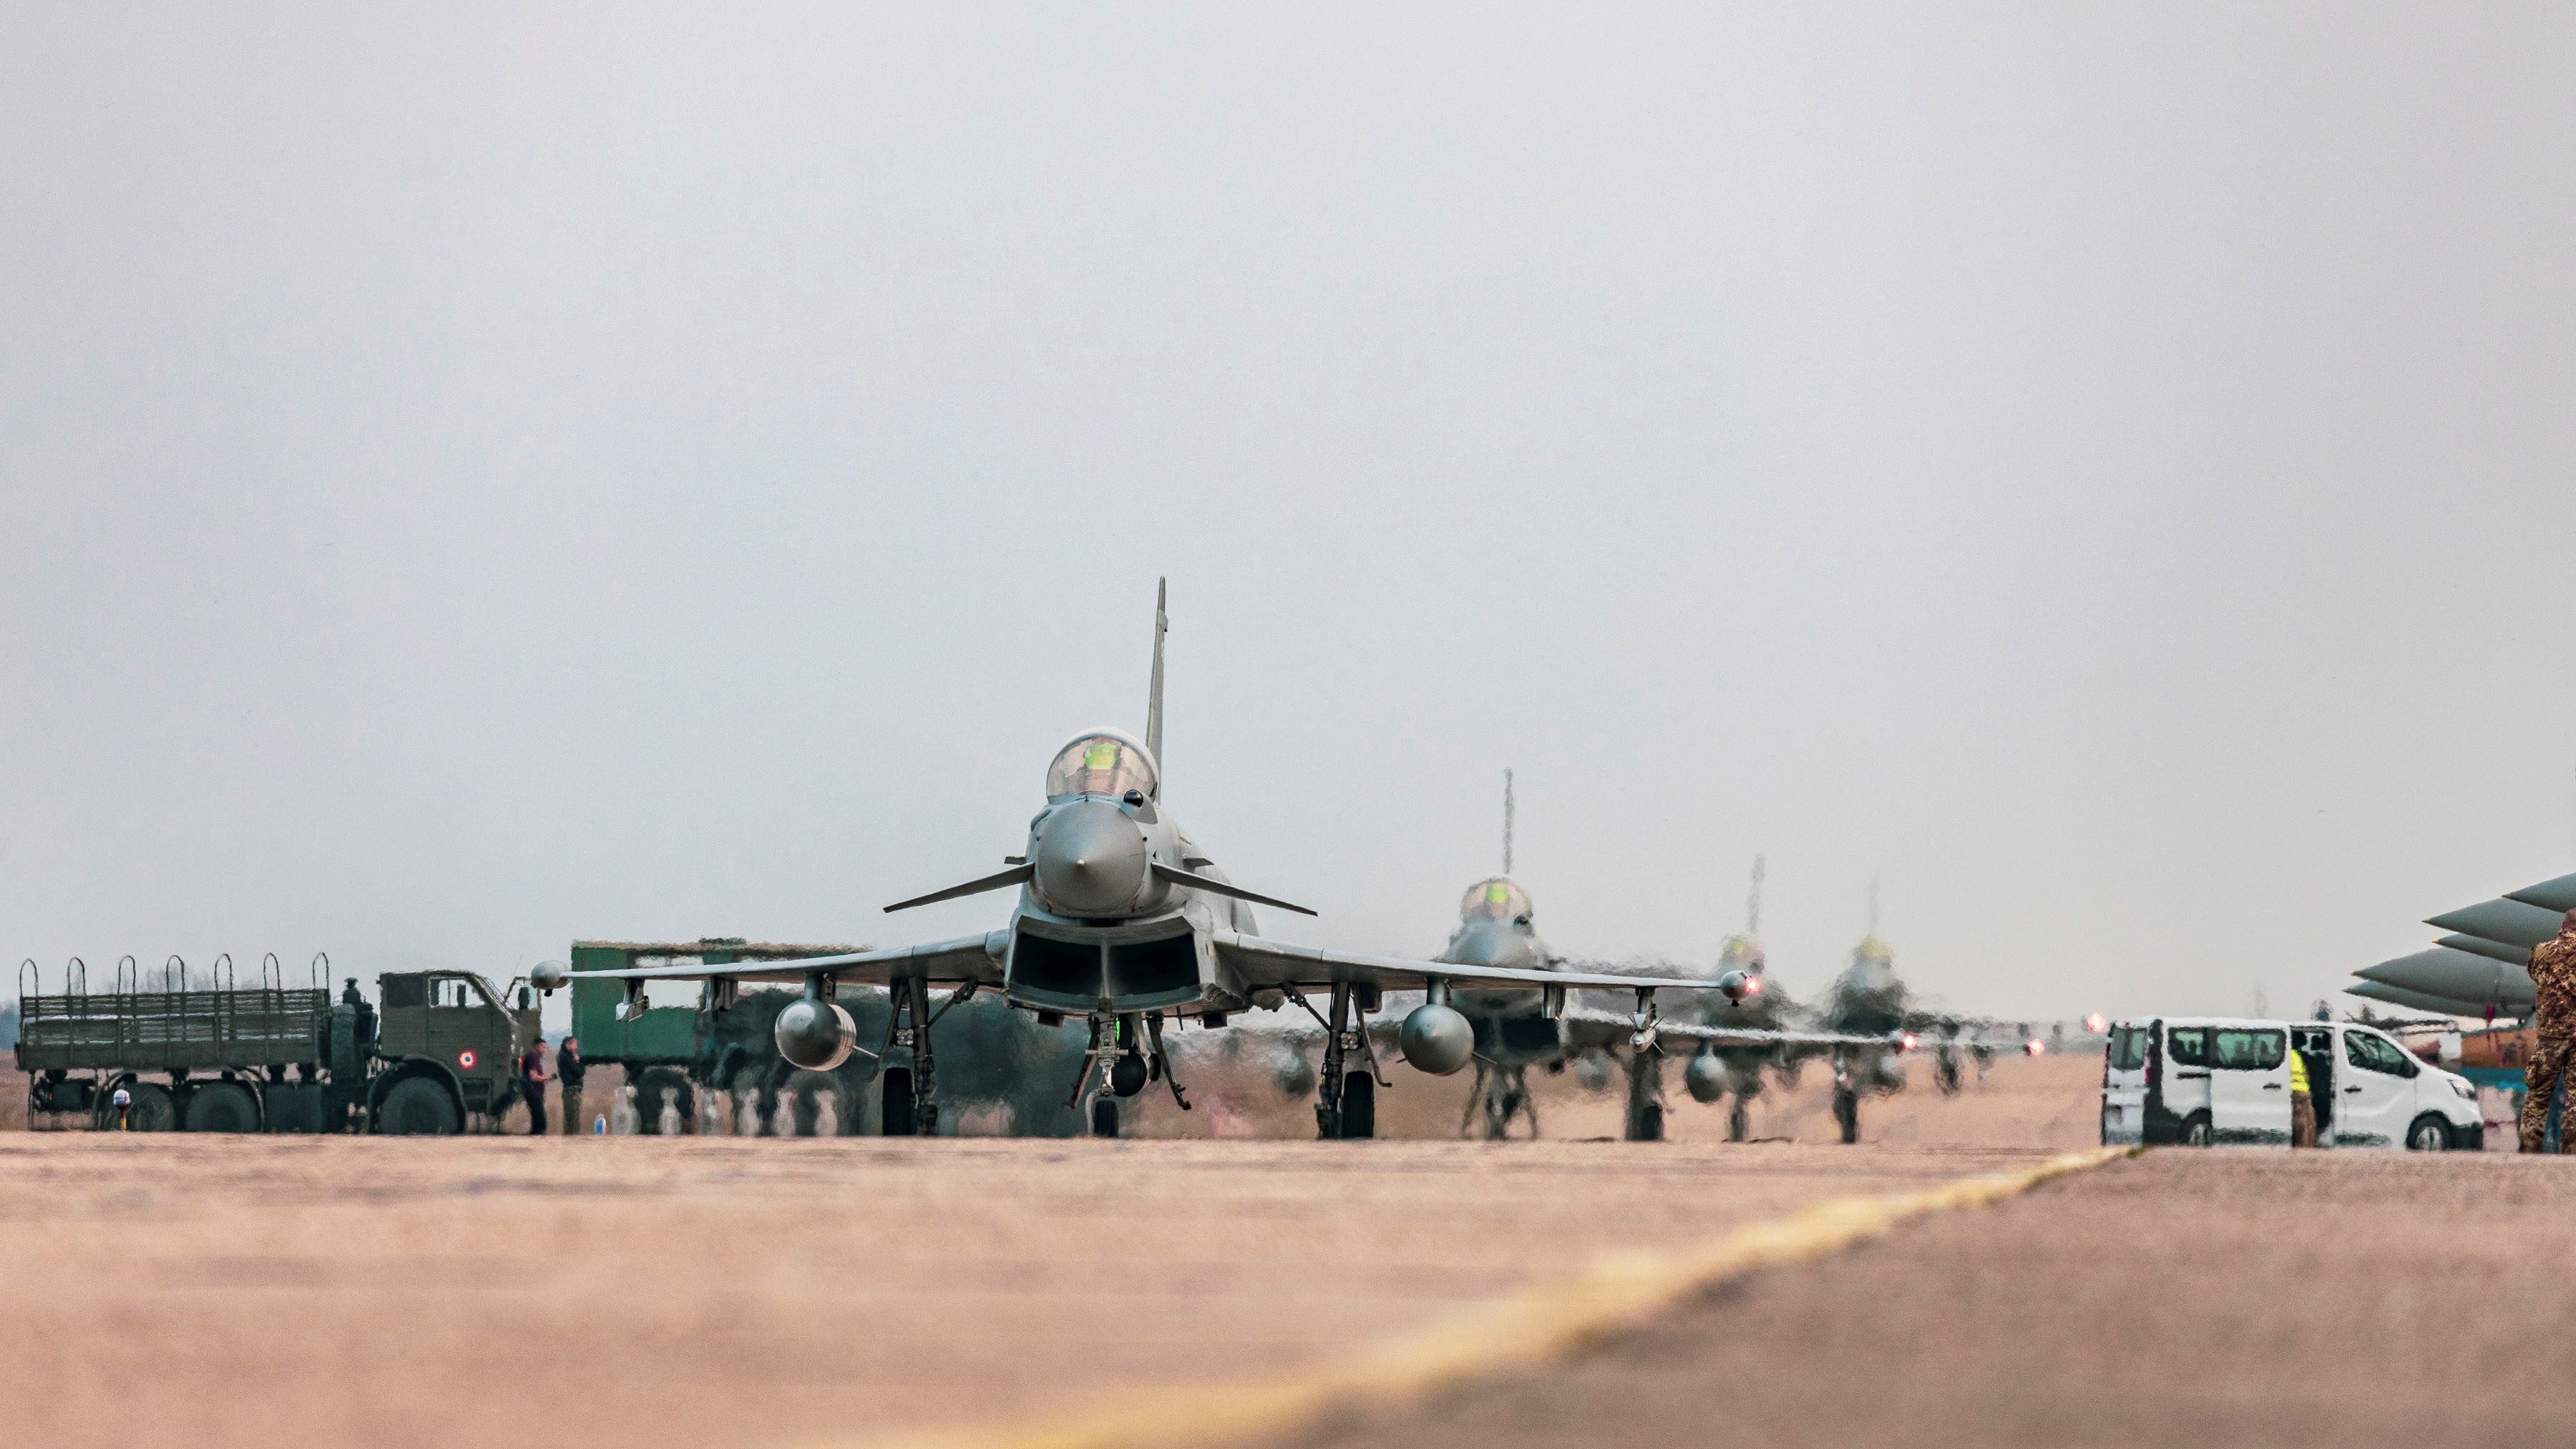 Typhoons on the airfield.